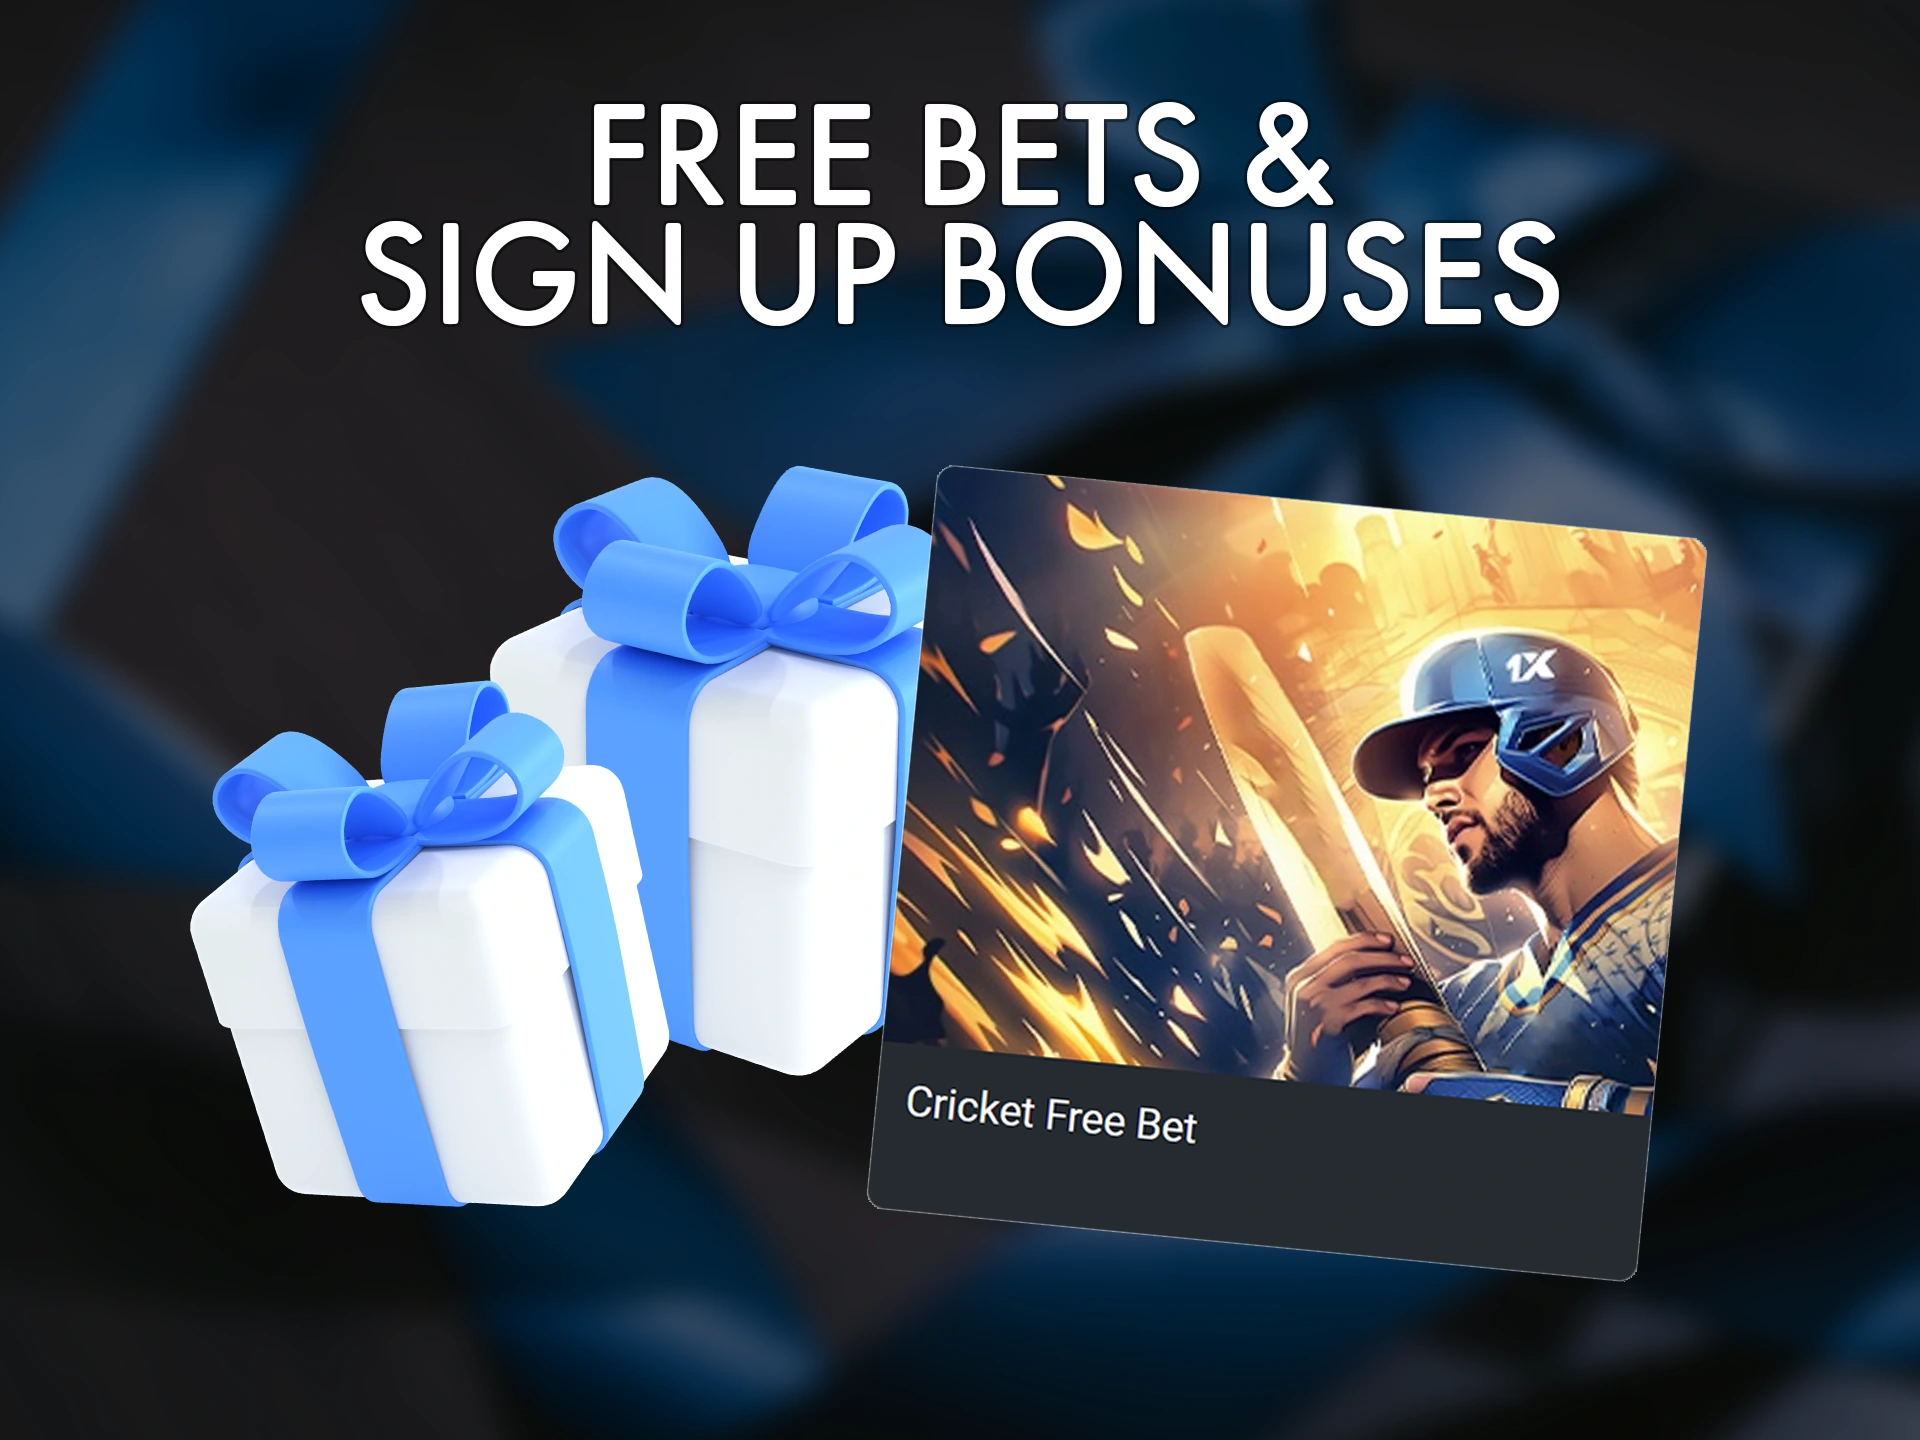 Get free bets and increase your winnings.